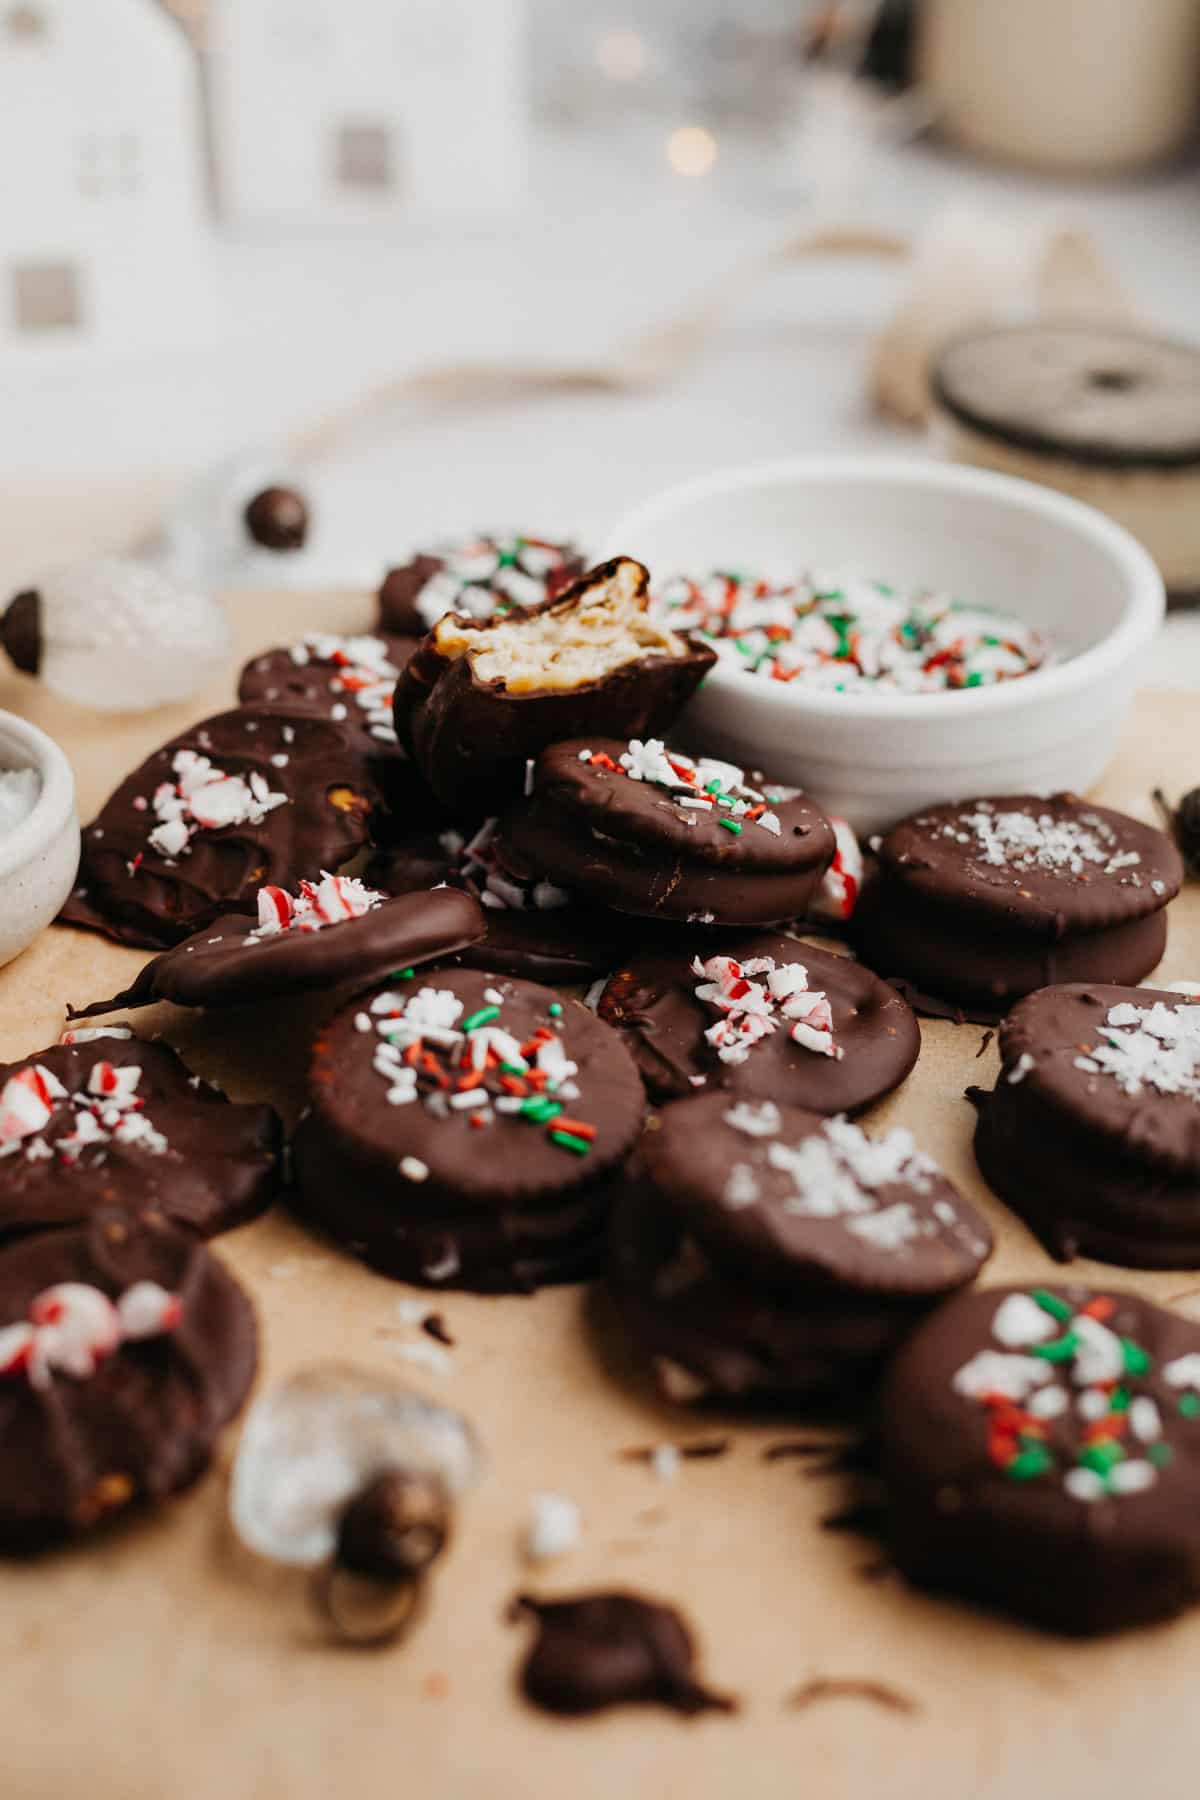 Chocolate dipped sandwich cookies covered in Christmas sprinkles.